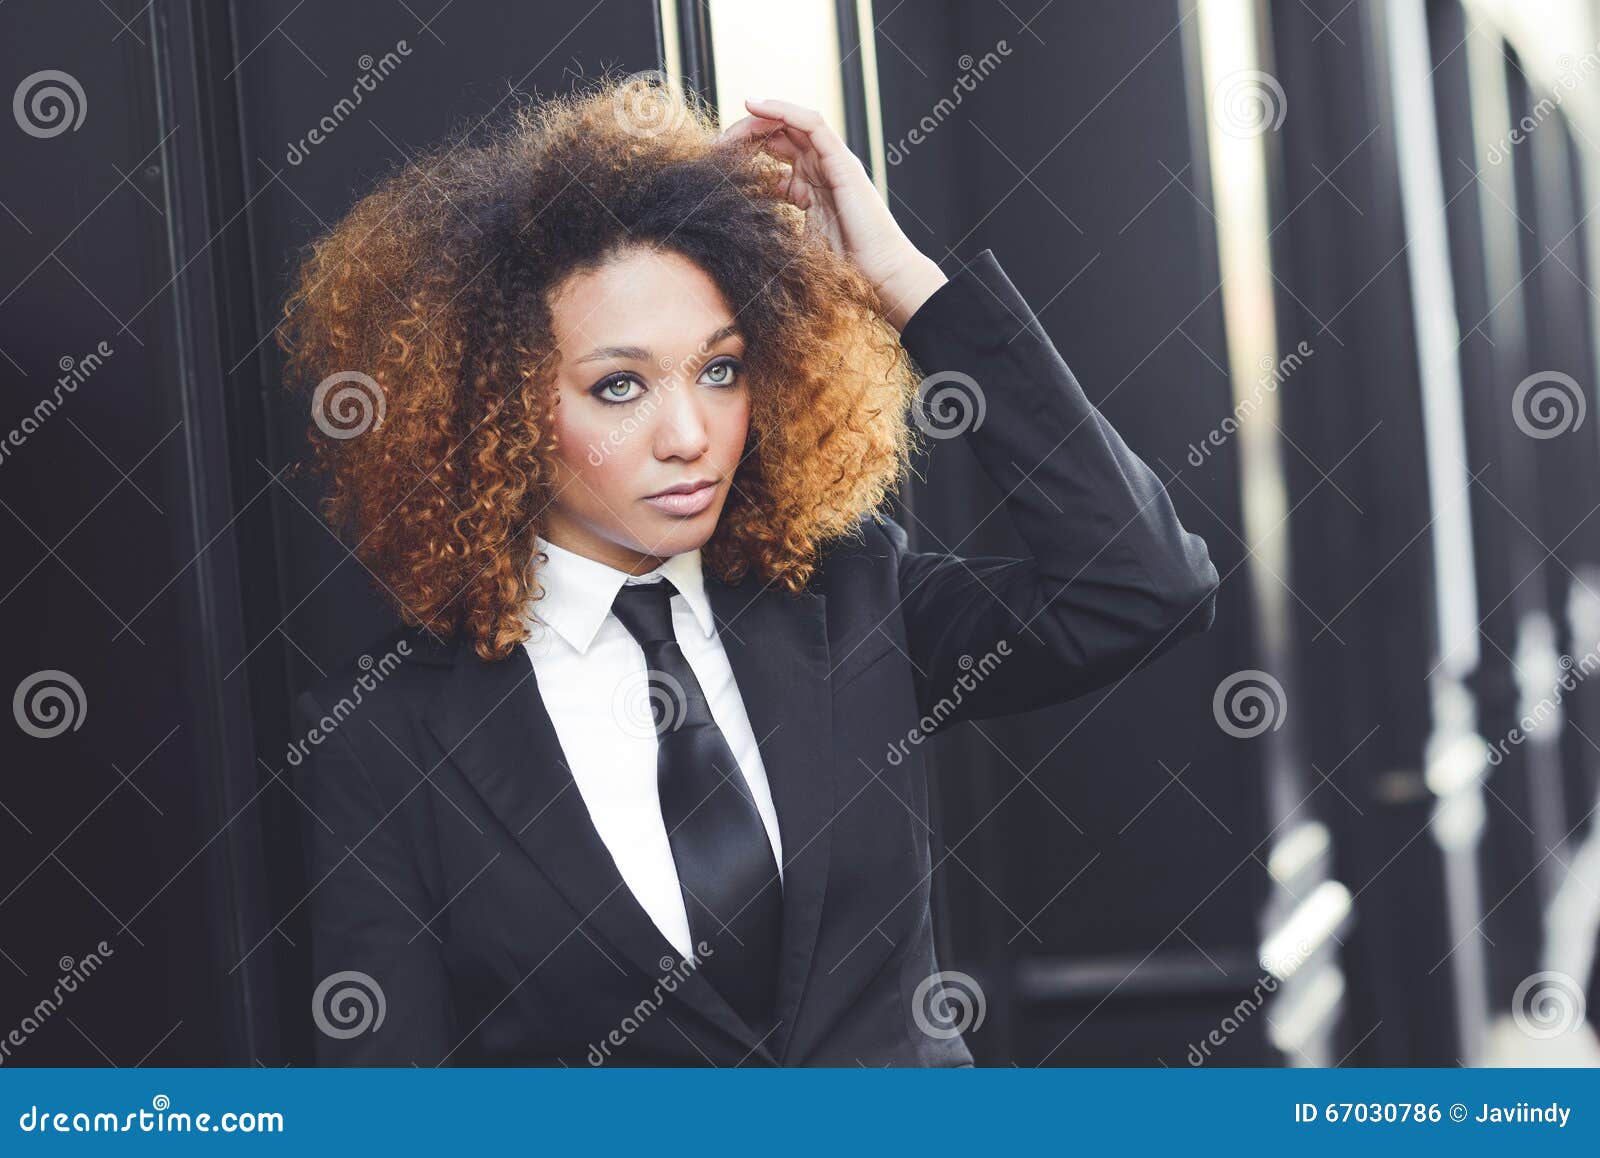 Black Businesswoman Wearing Suit And Tie In Urban Background Stock ...